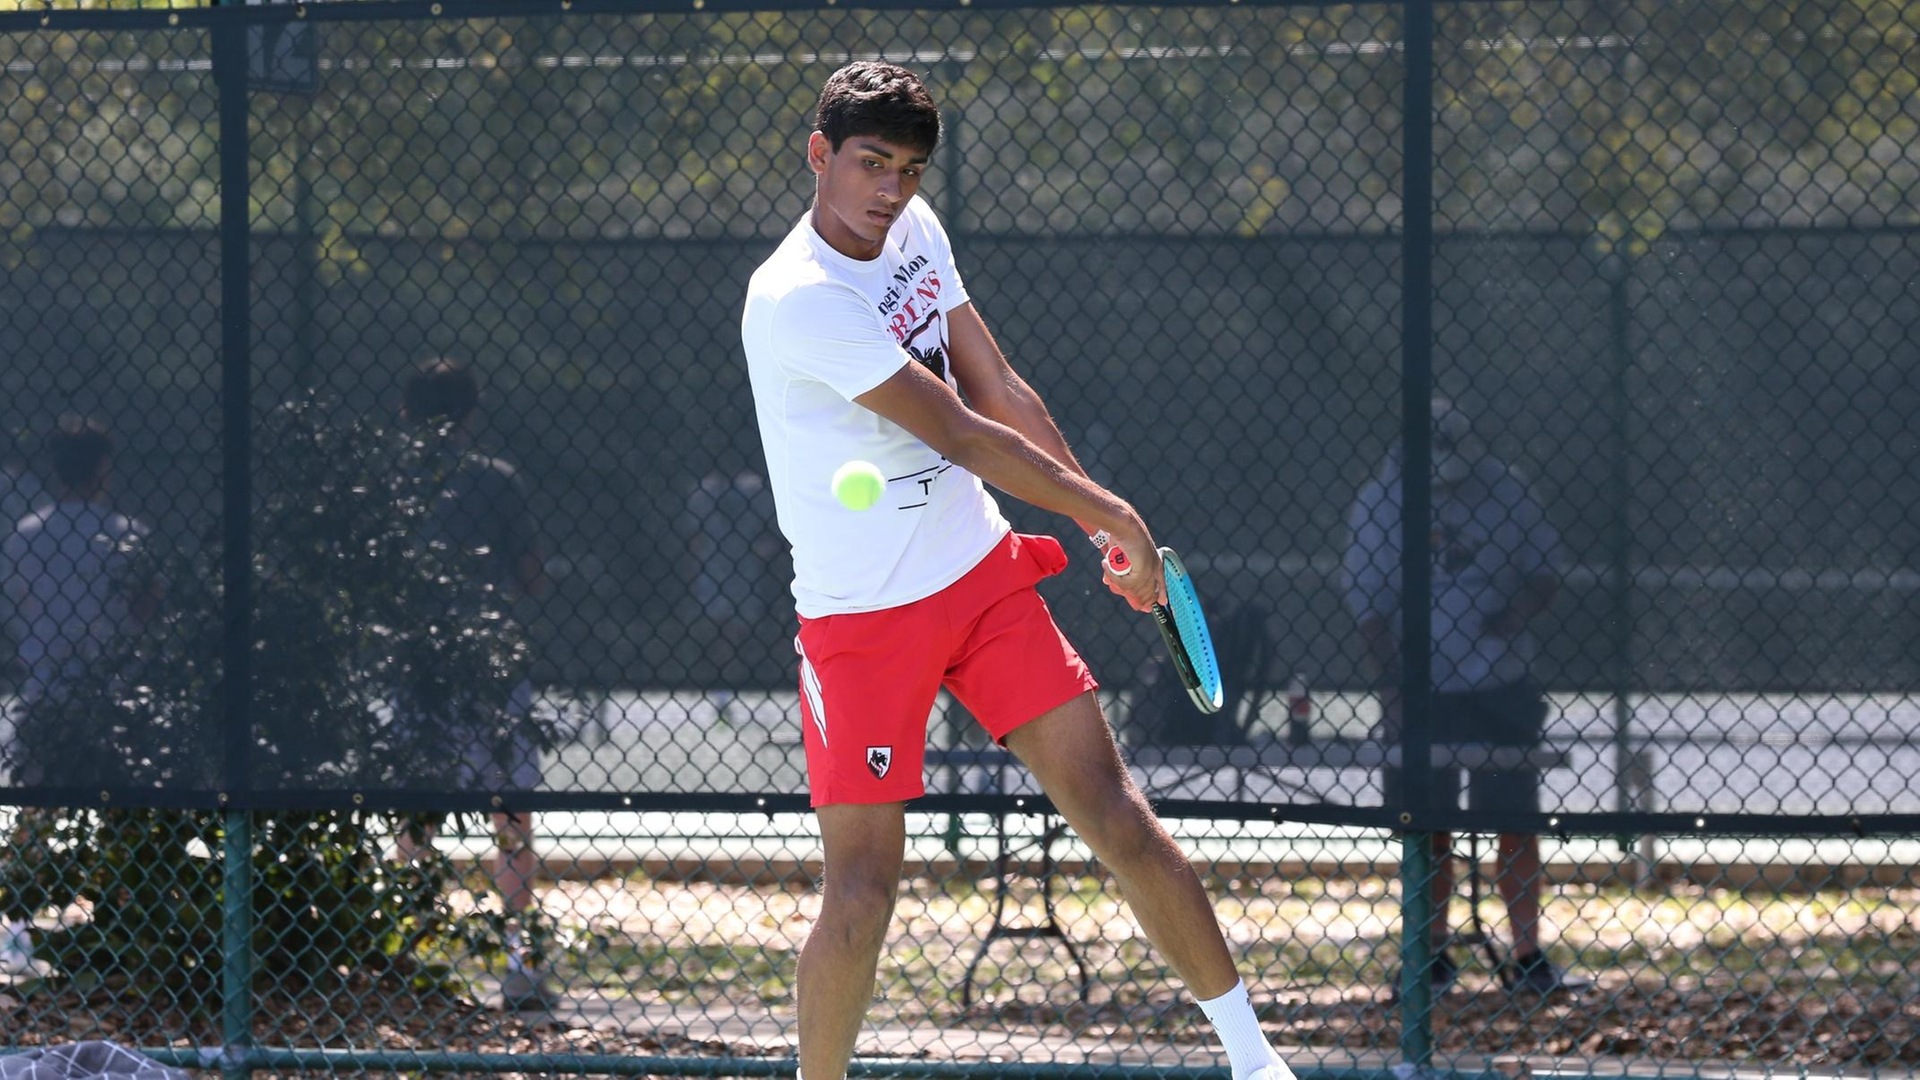 men's tennis player wearing a white shirt and red shorts swinging racquet at the ball